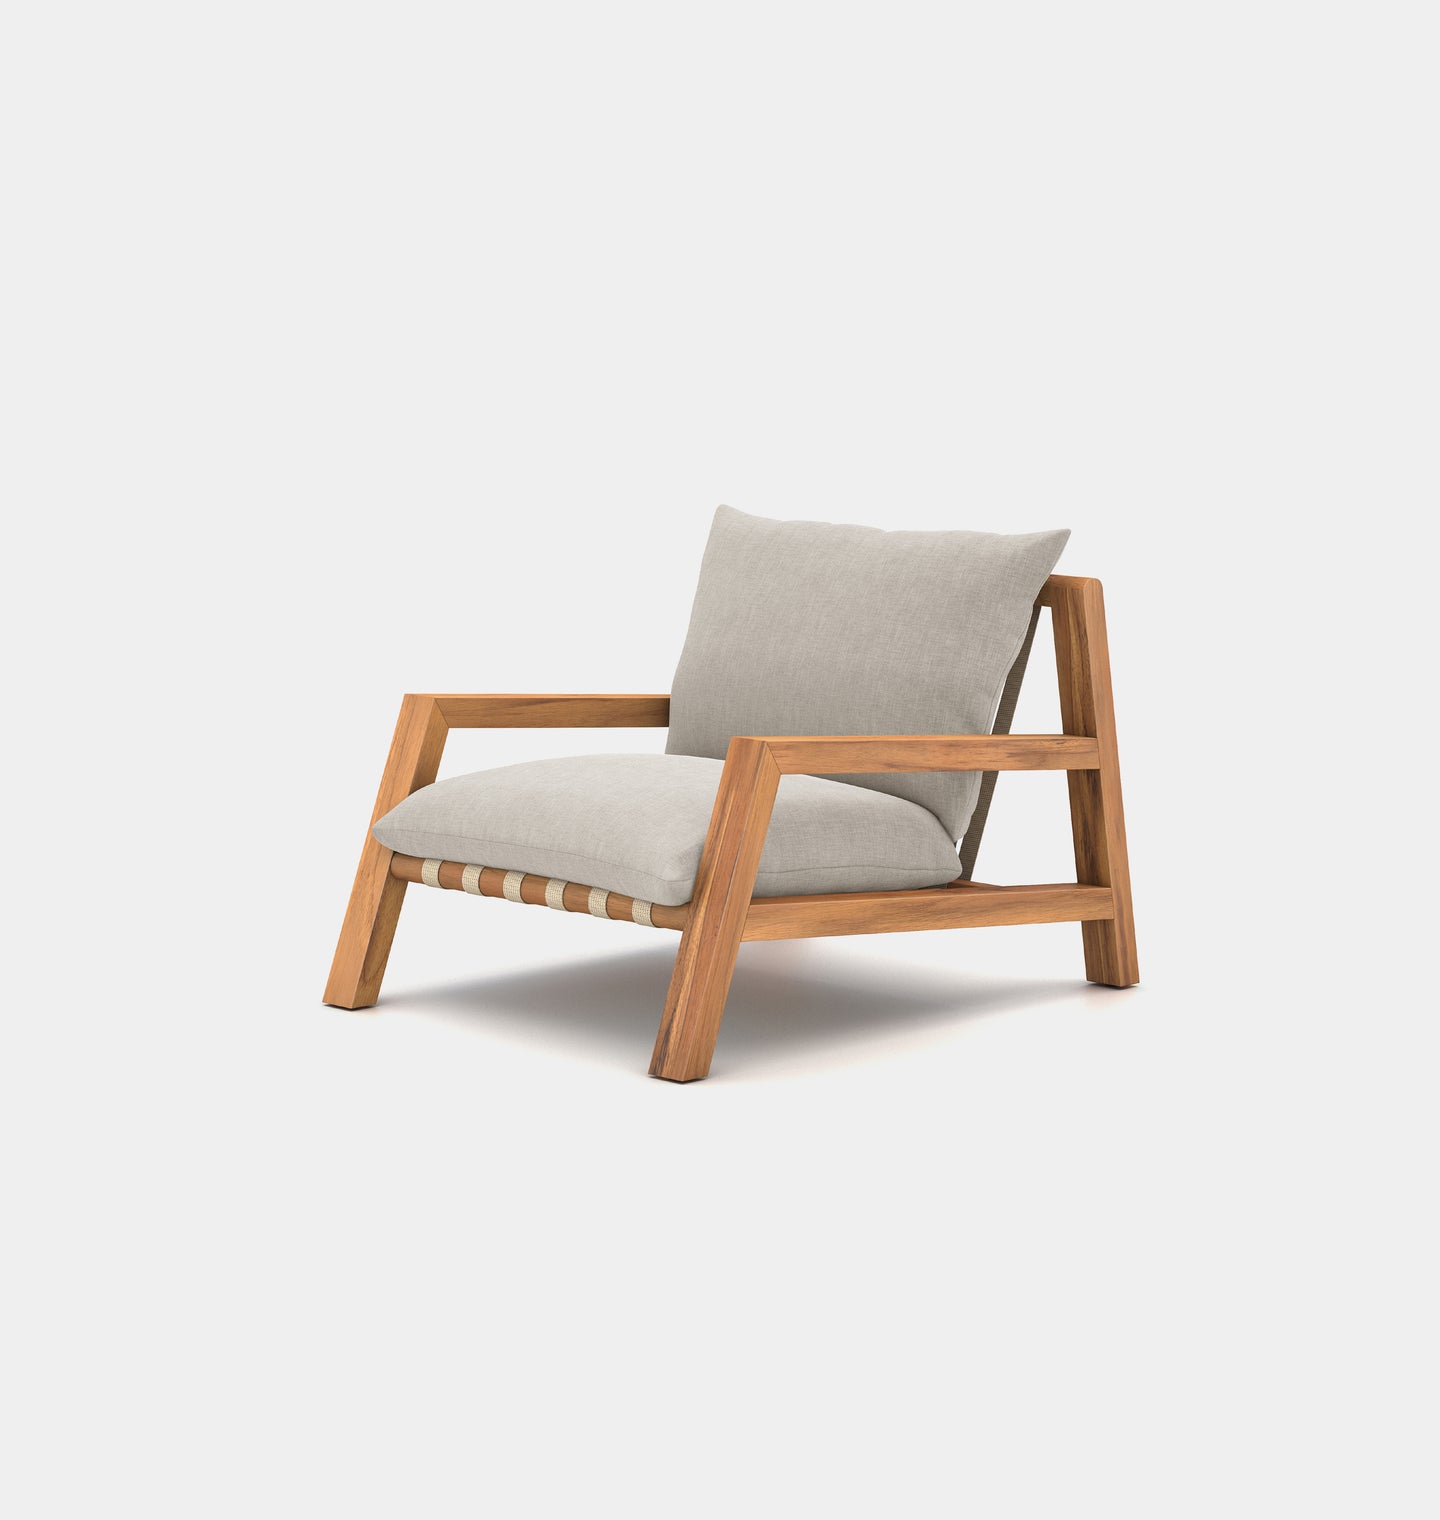 Anderson Outdoor Chair